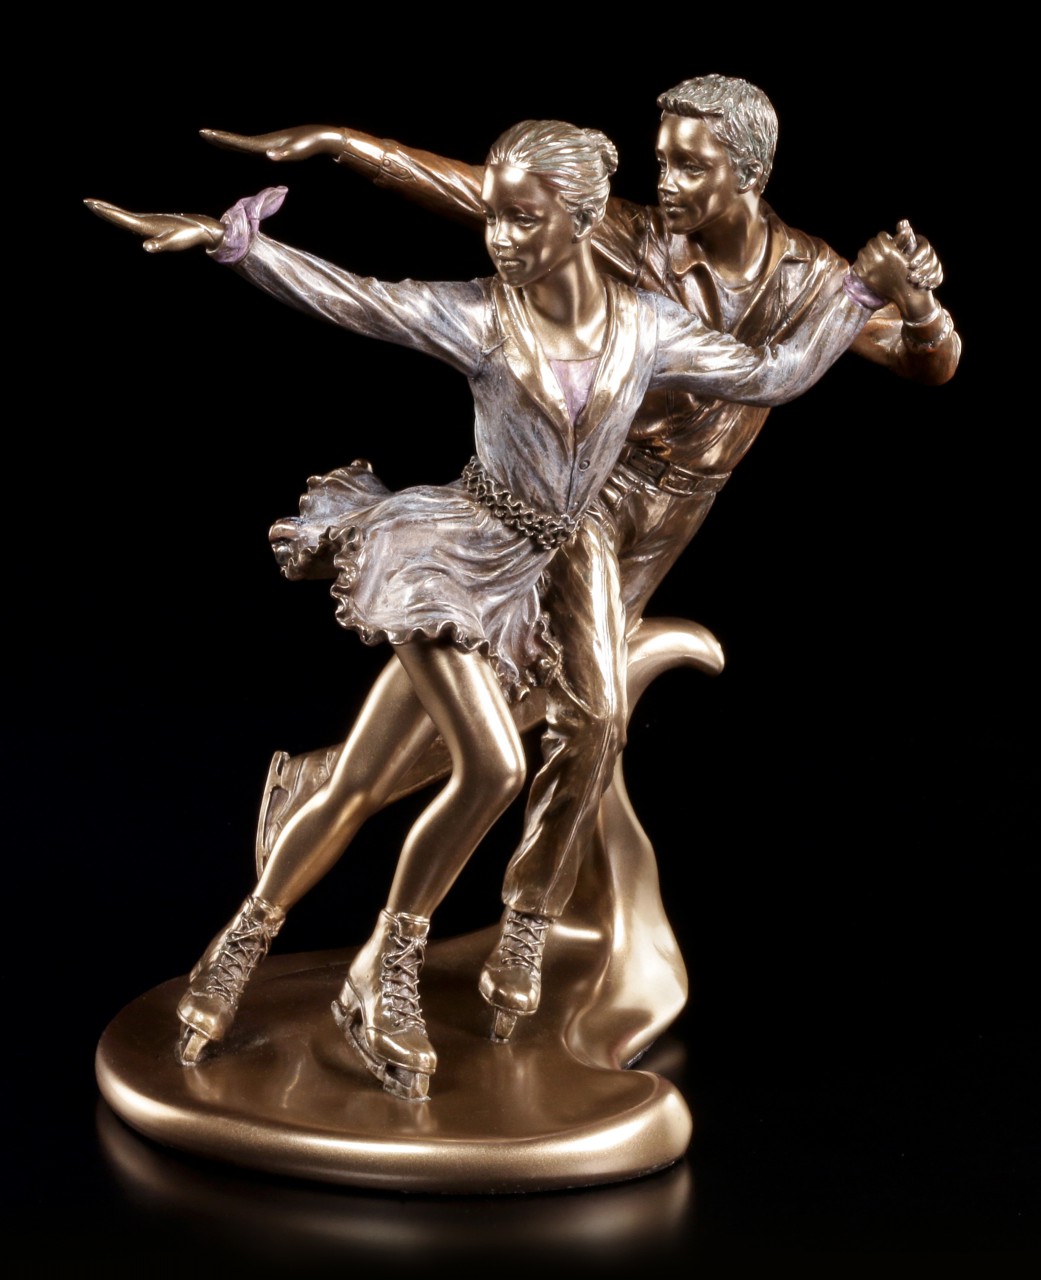 Ice Skater Figurines - Dancing on Ice